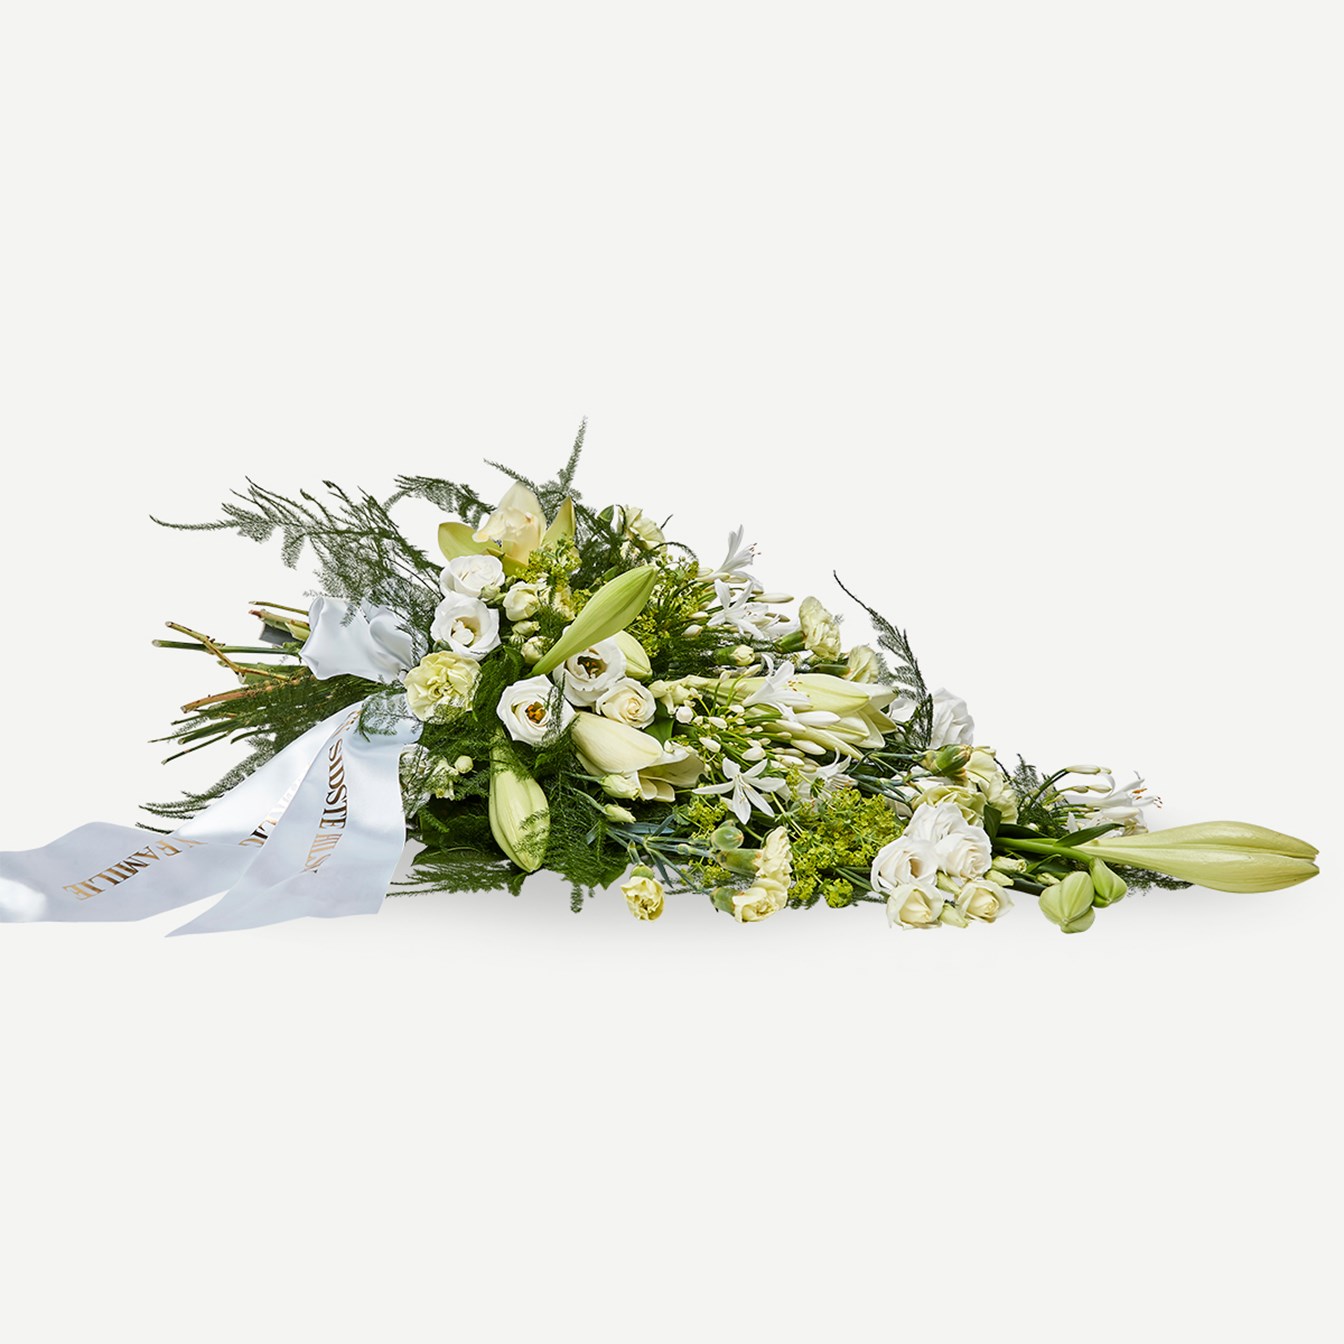 product image for Classic funeral spray with ribbon